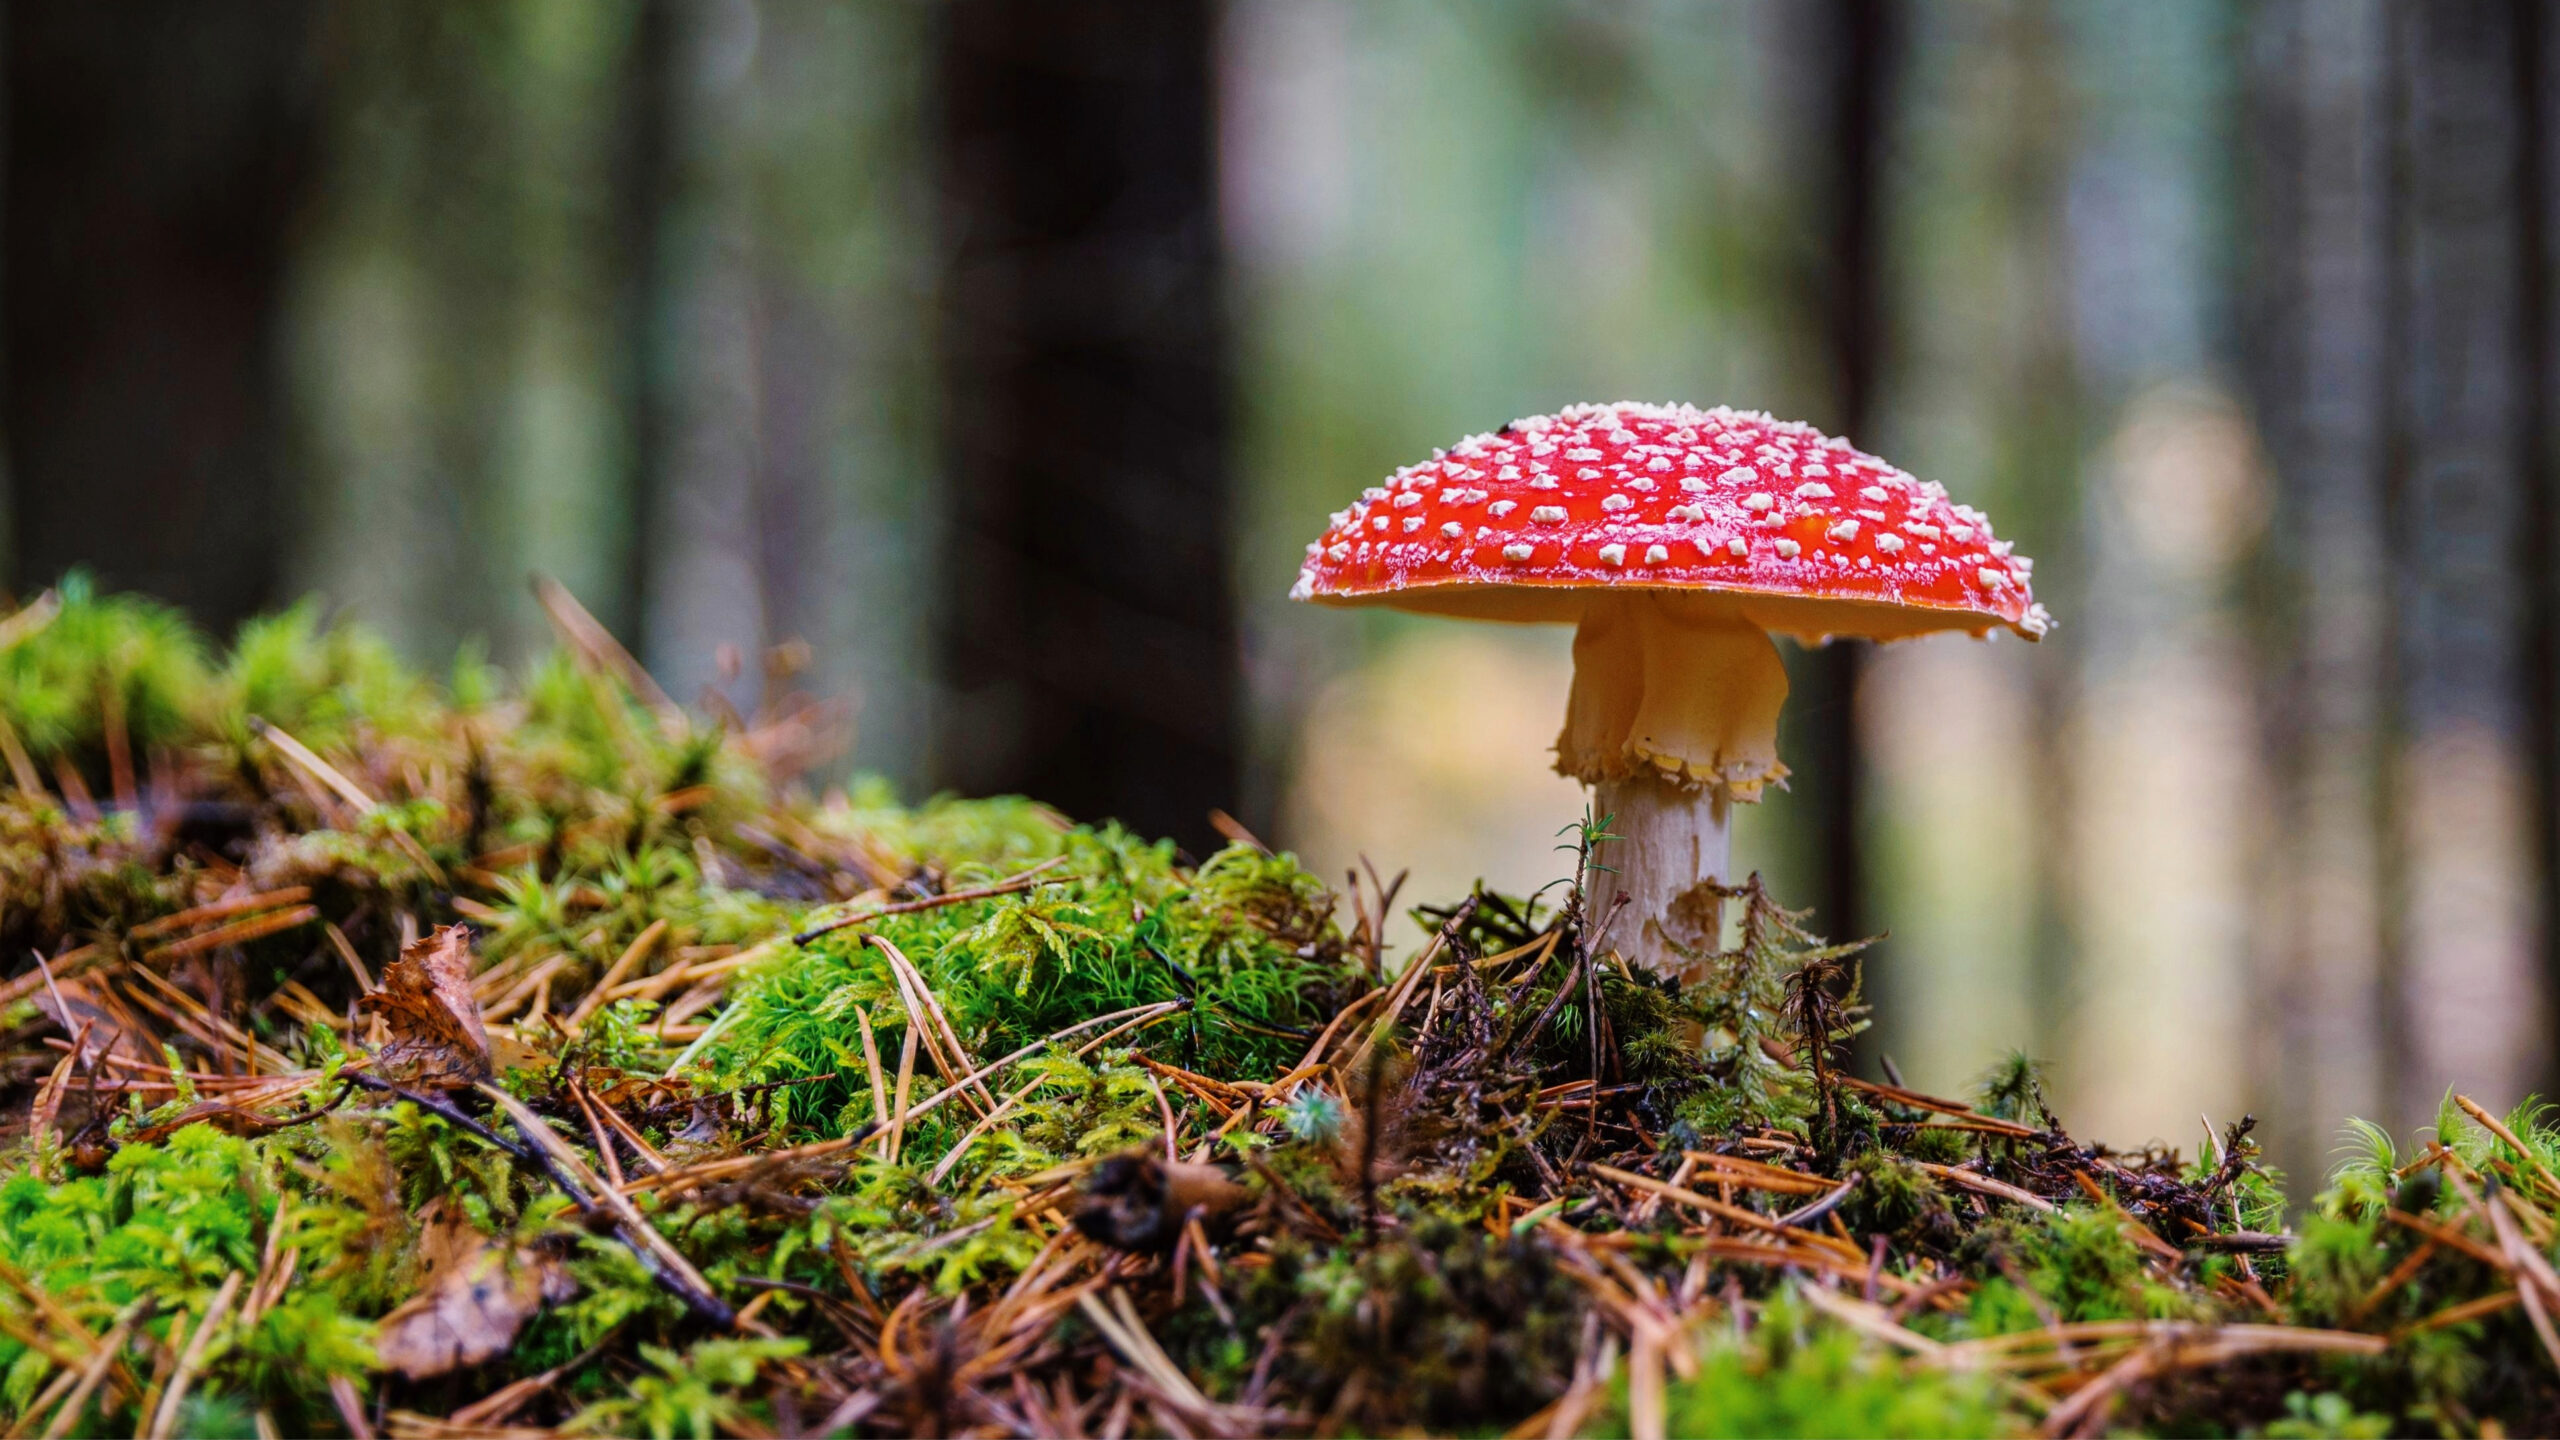 Image of a mushroom growing in the forrest.